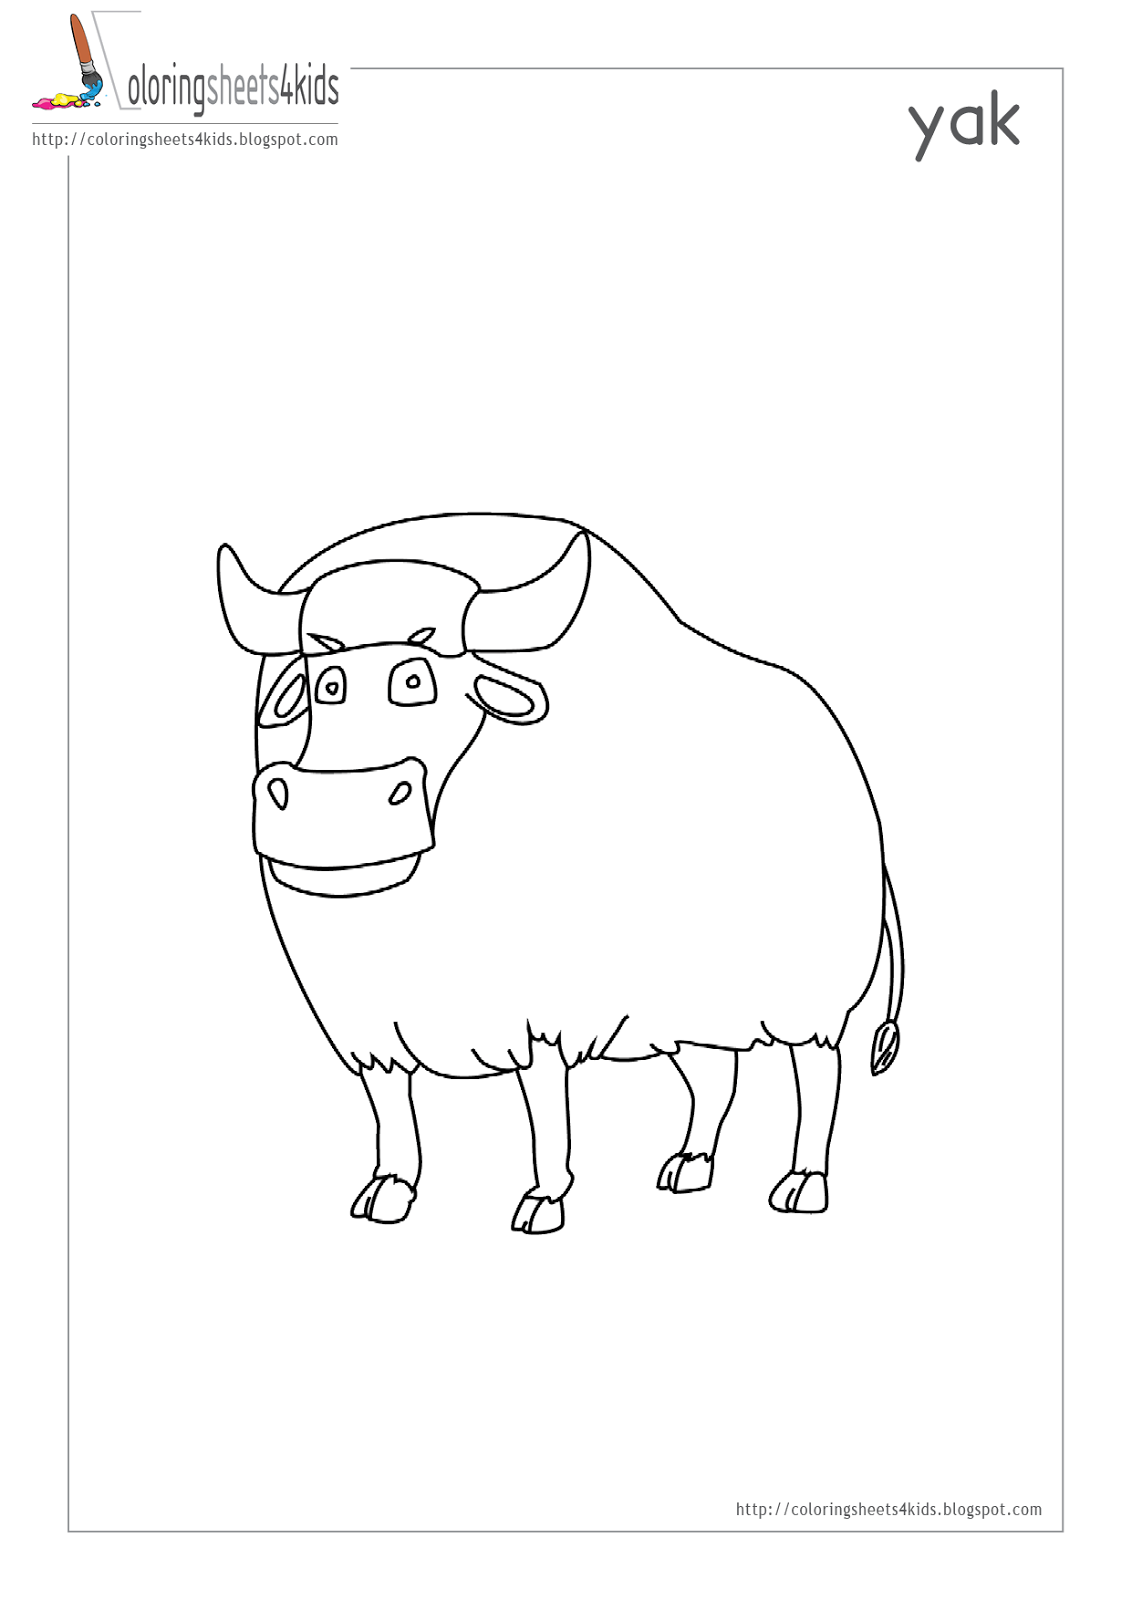 Coloring Pages for Kids: Yak coloring page